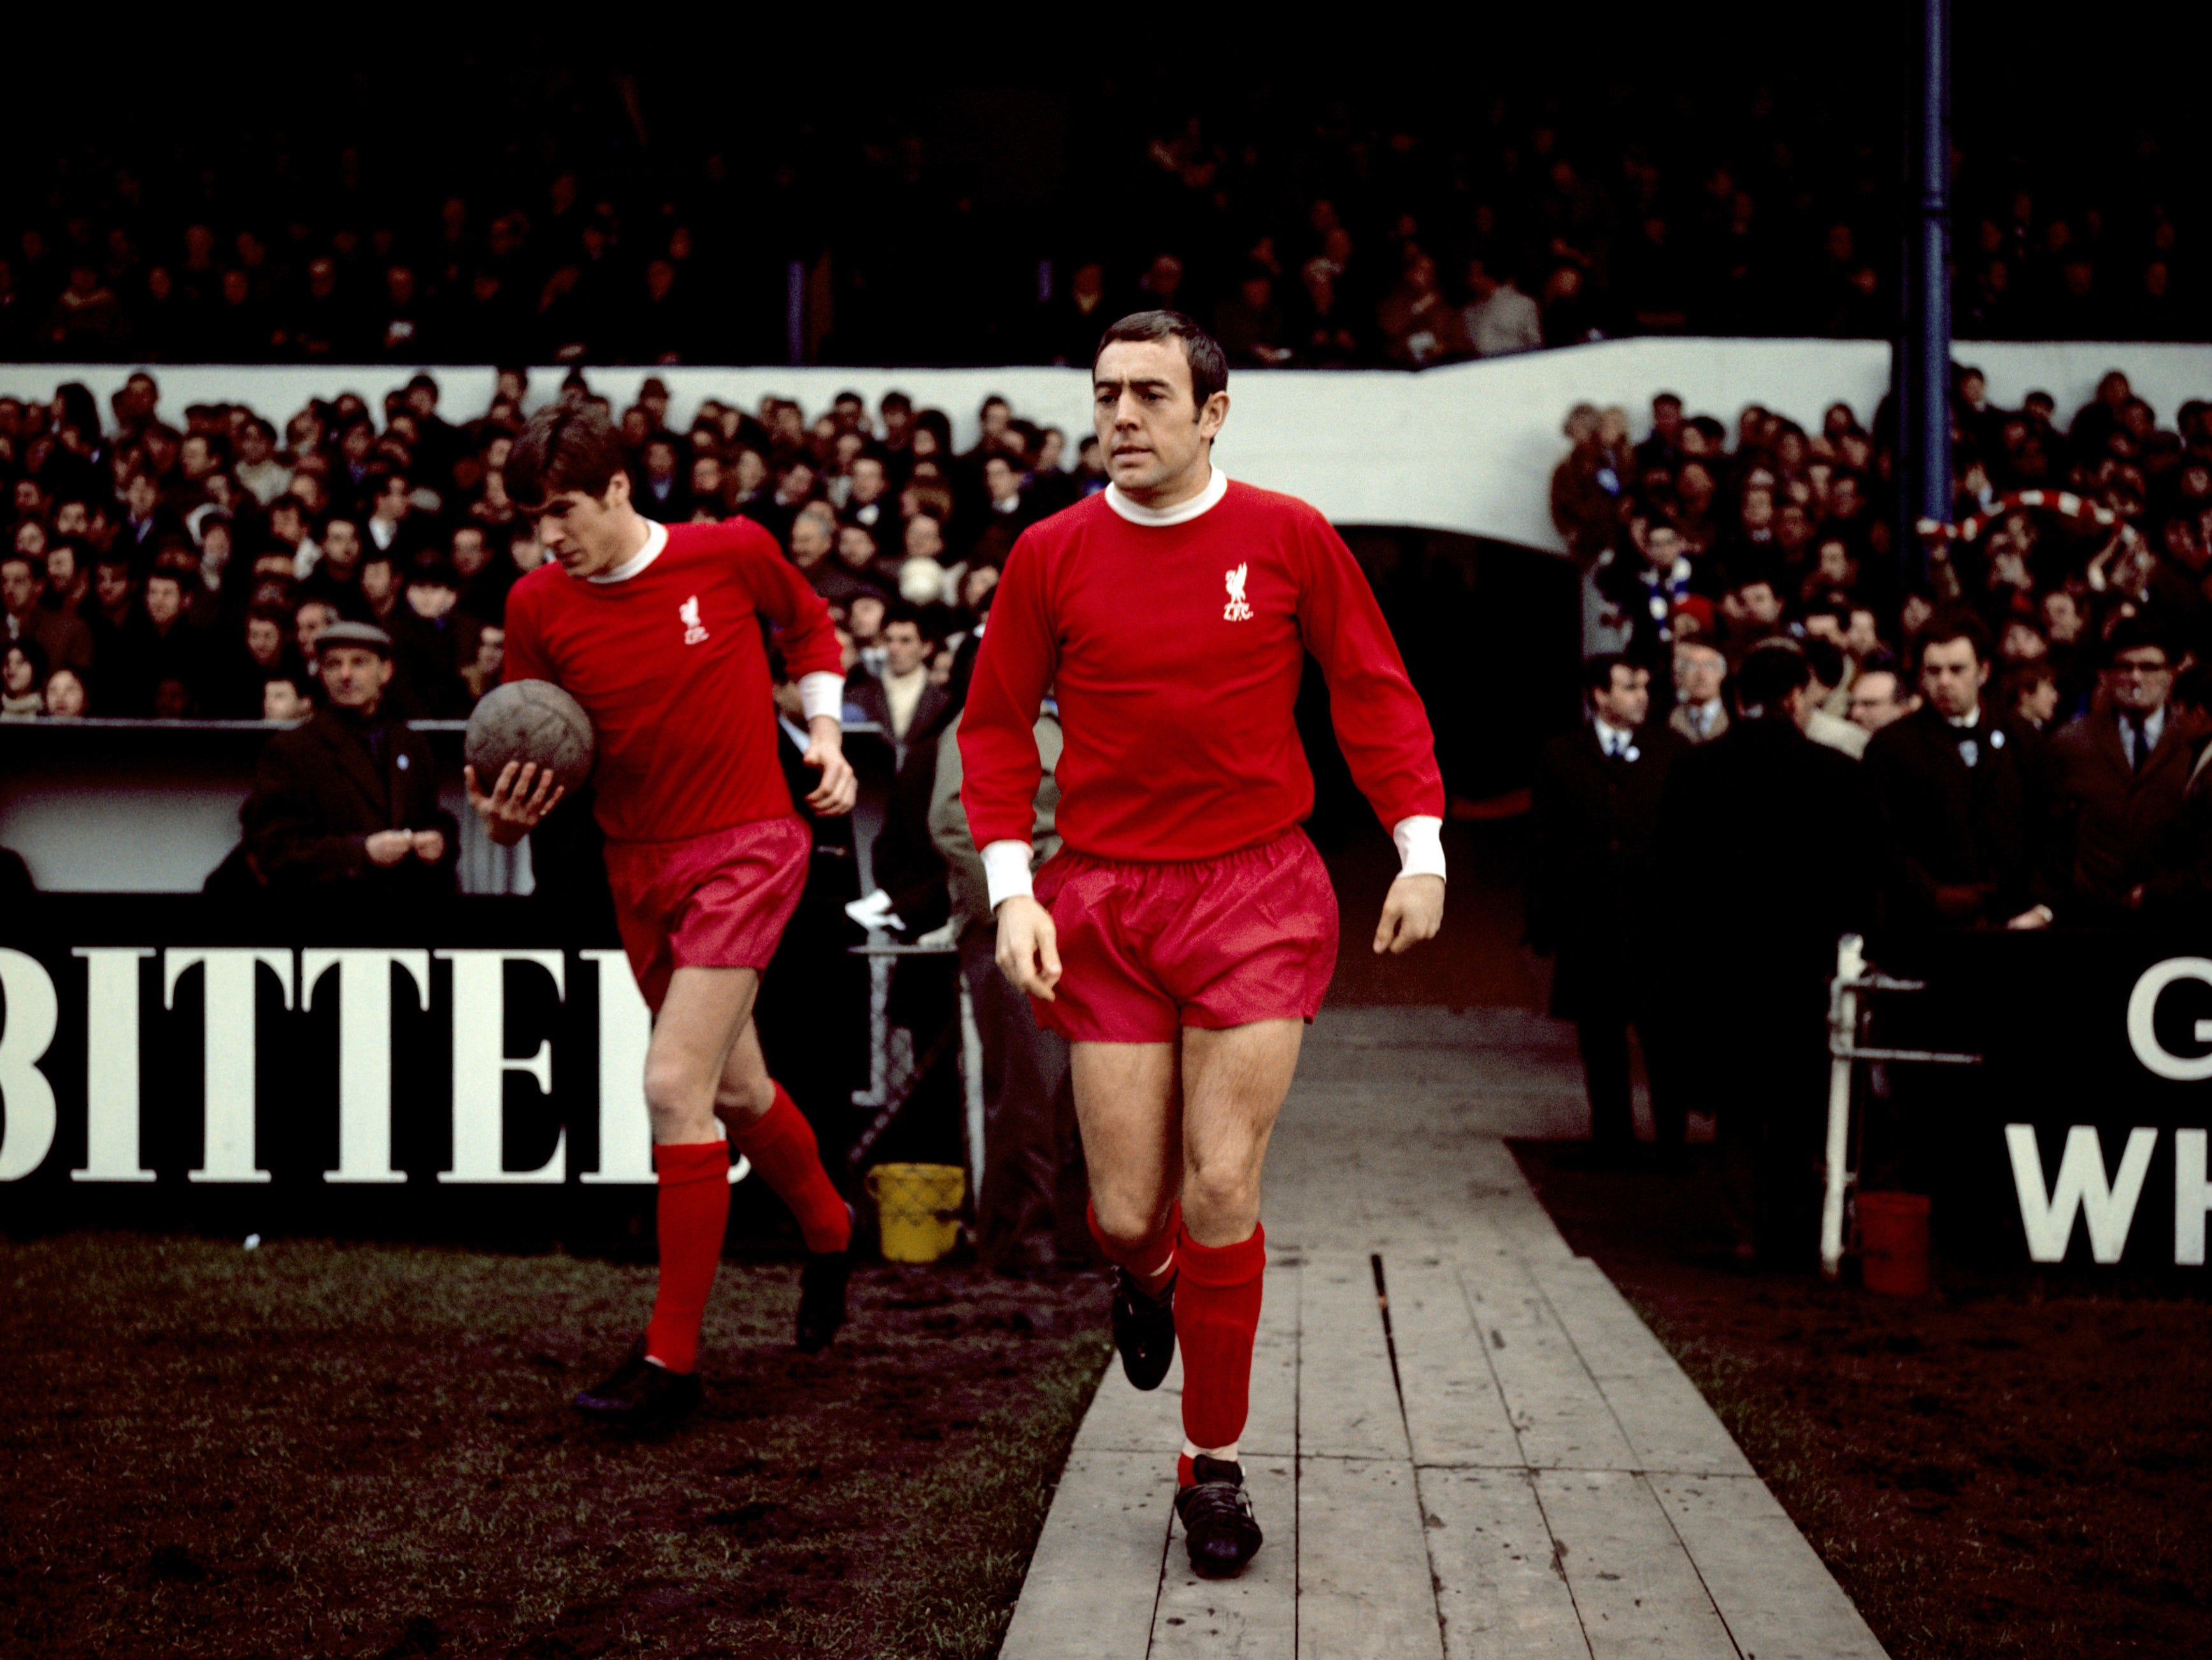 St John (centre) walks out for the Reds in 1969